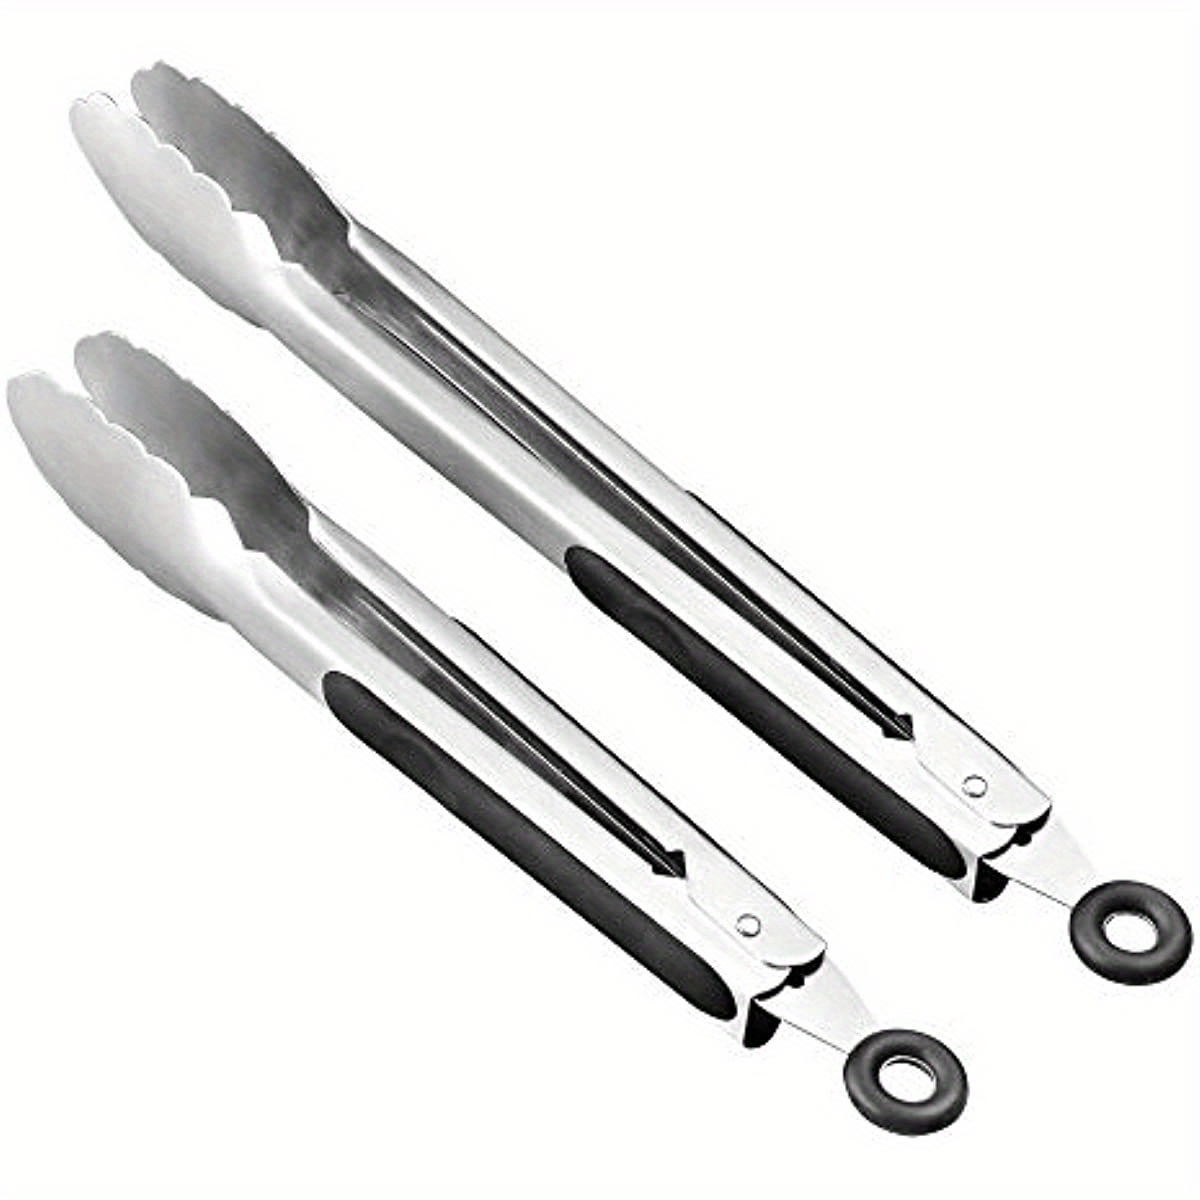 12 Inch and 9 Inch Stainless Steel Tongs